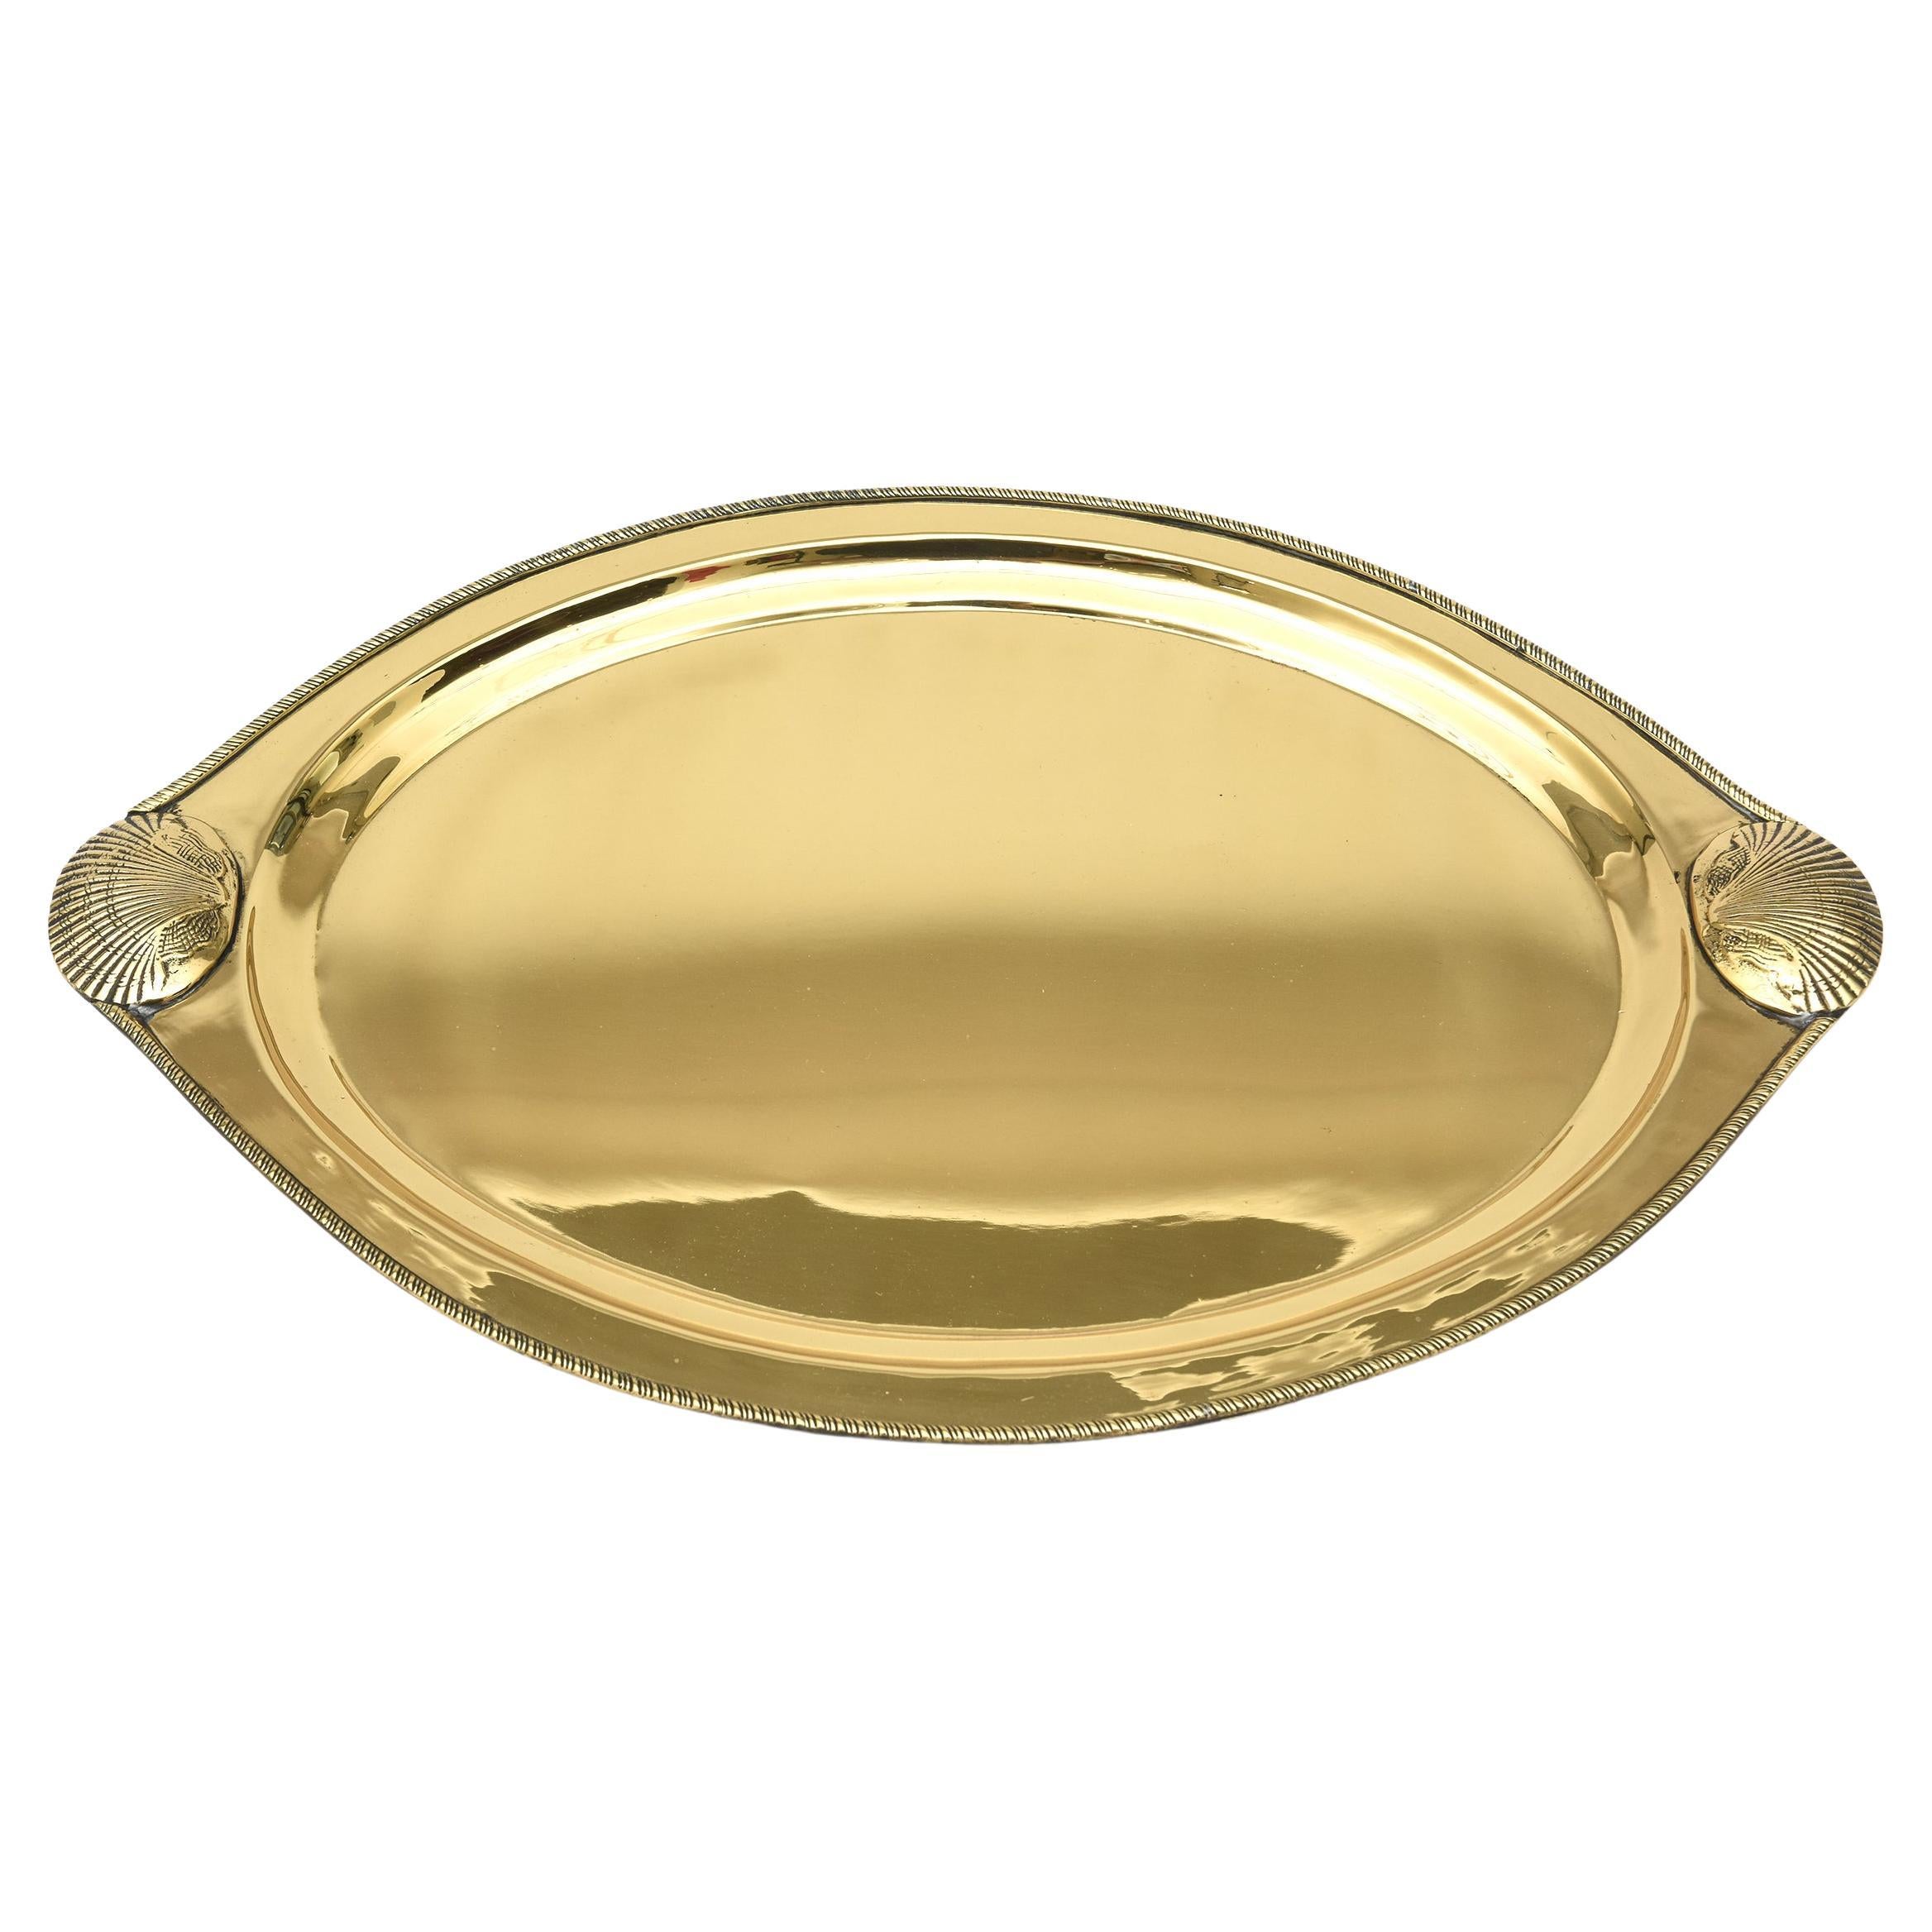 Vintage Brass Oval Tray With Shell Design Barware